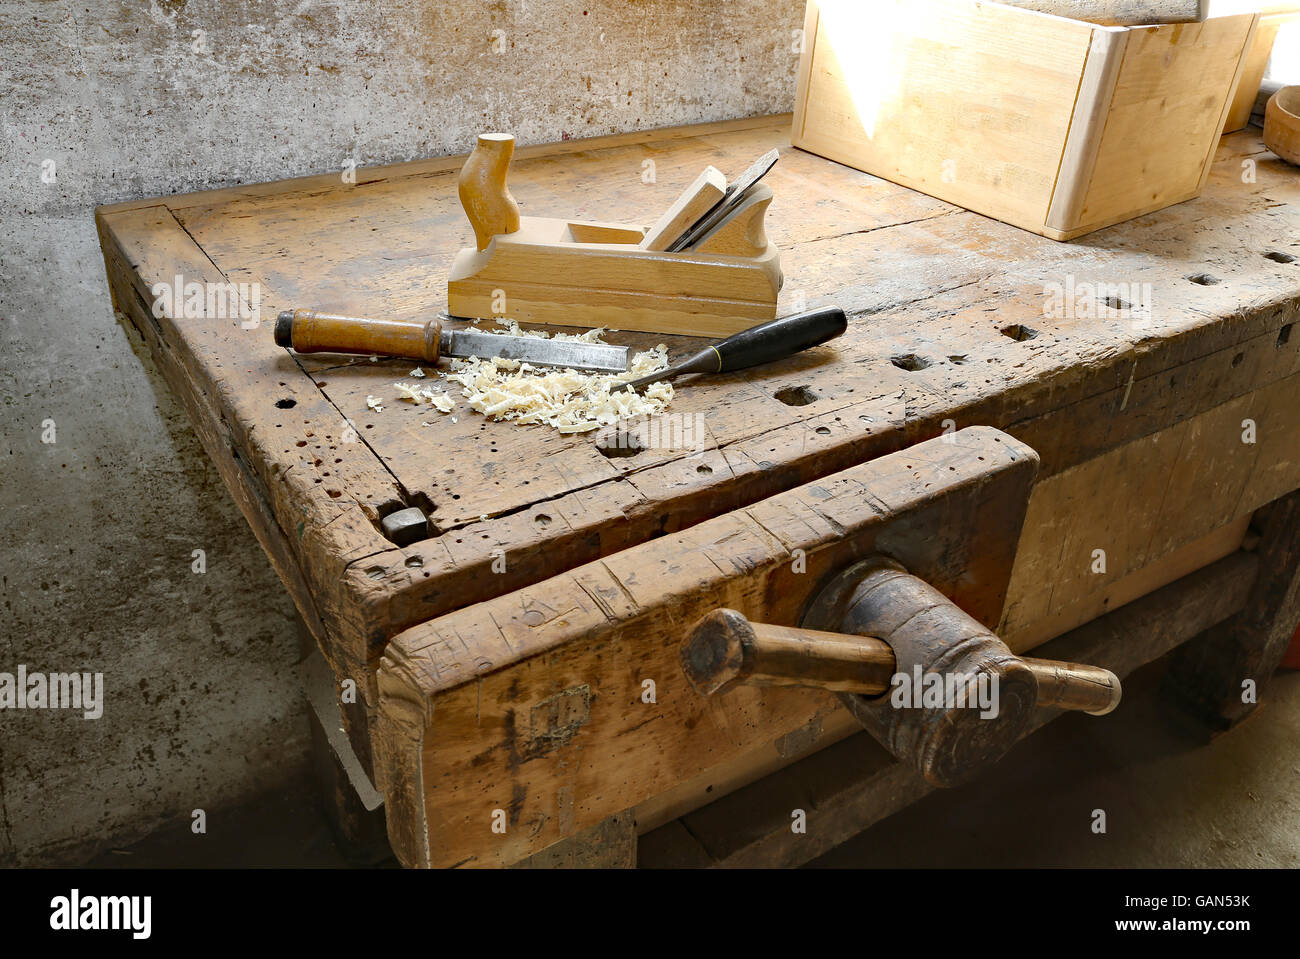 plane and chisels and a saw on the Workbench with a wooden grip inside the craftsman joinery manufacturer Stock Photo